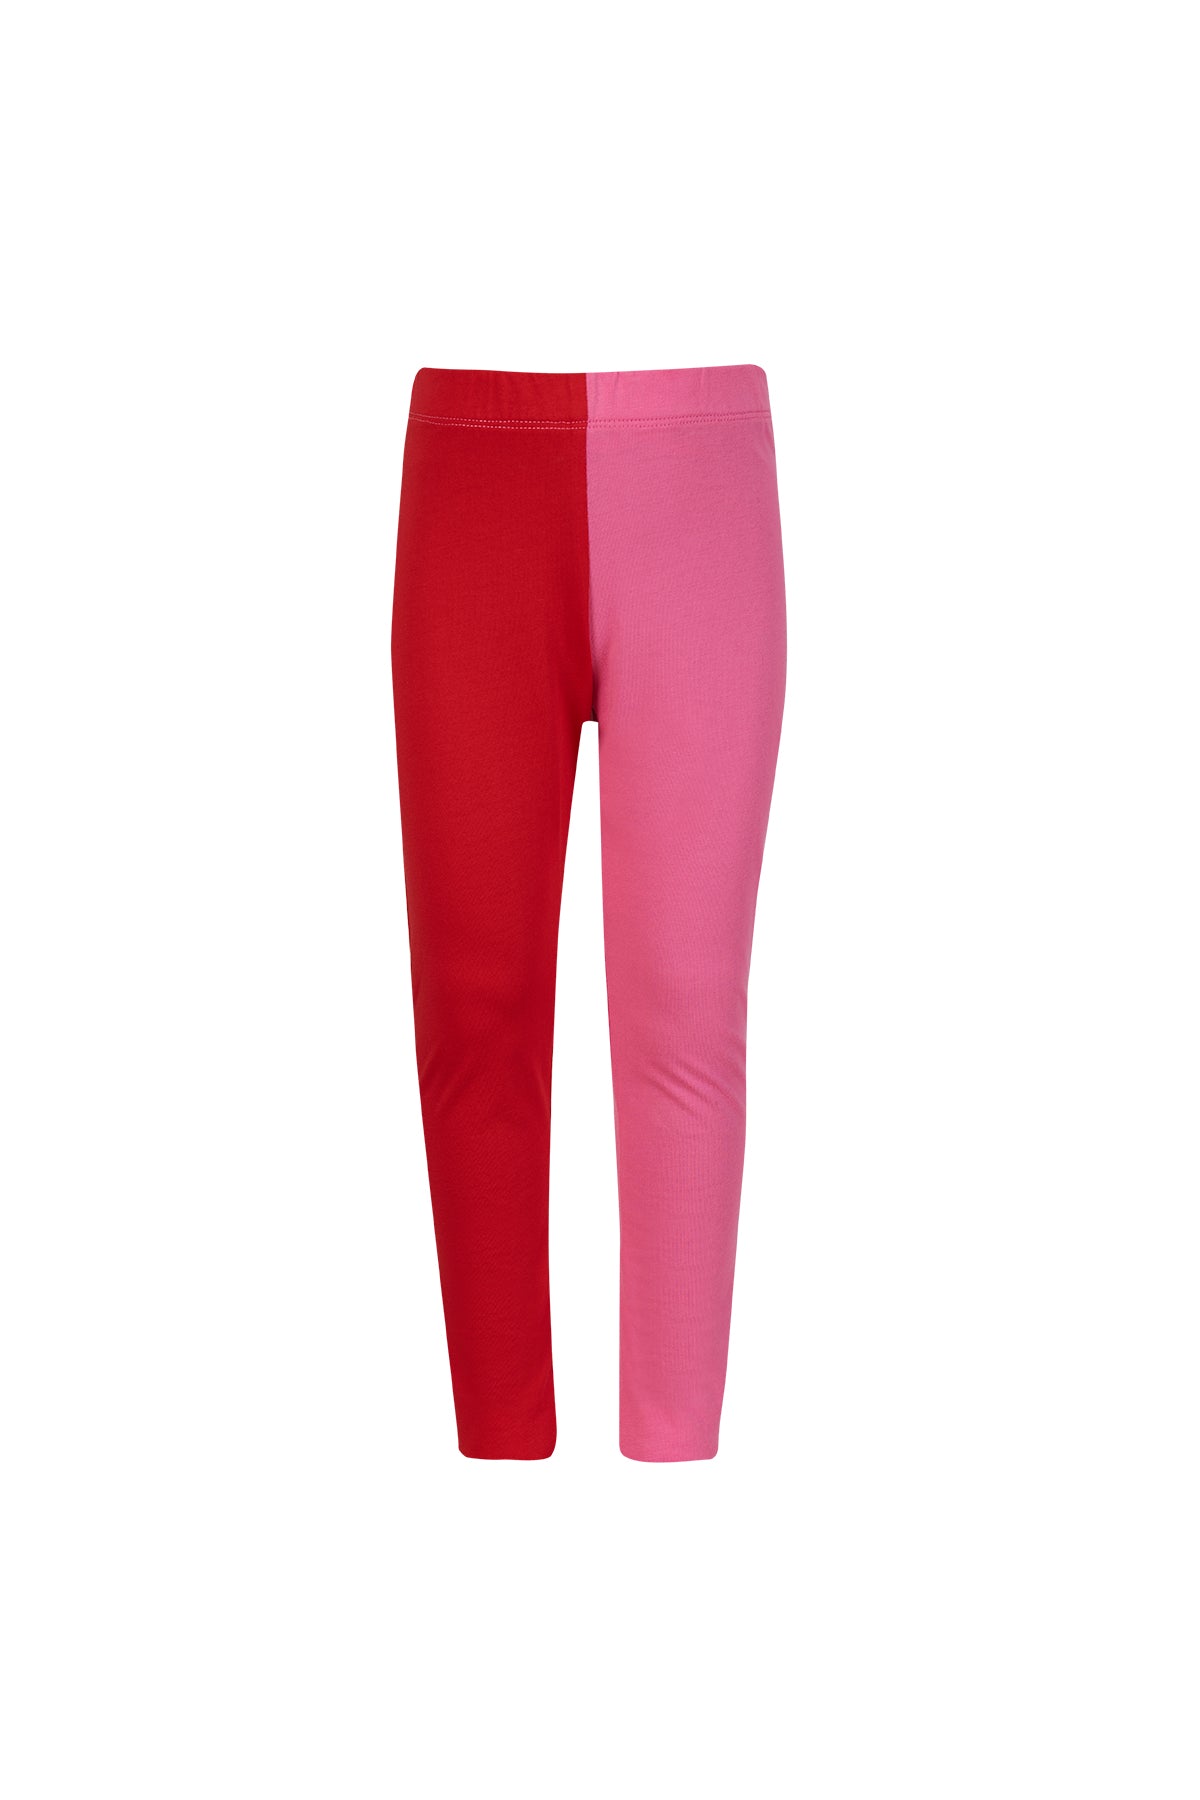 RED AND PINK LEGGINGS MA KIDS